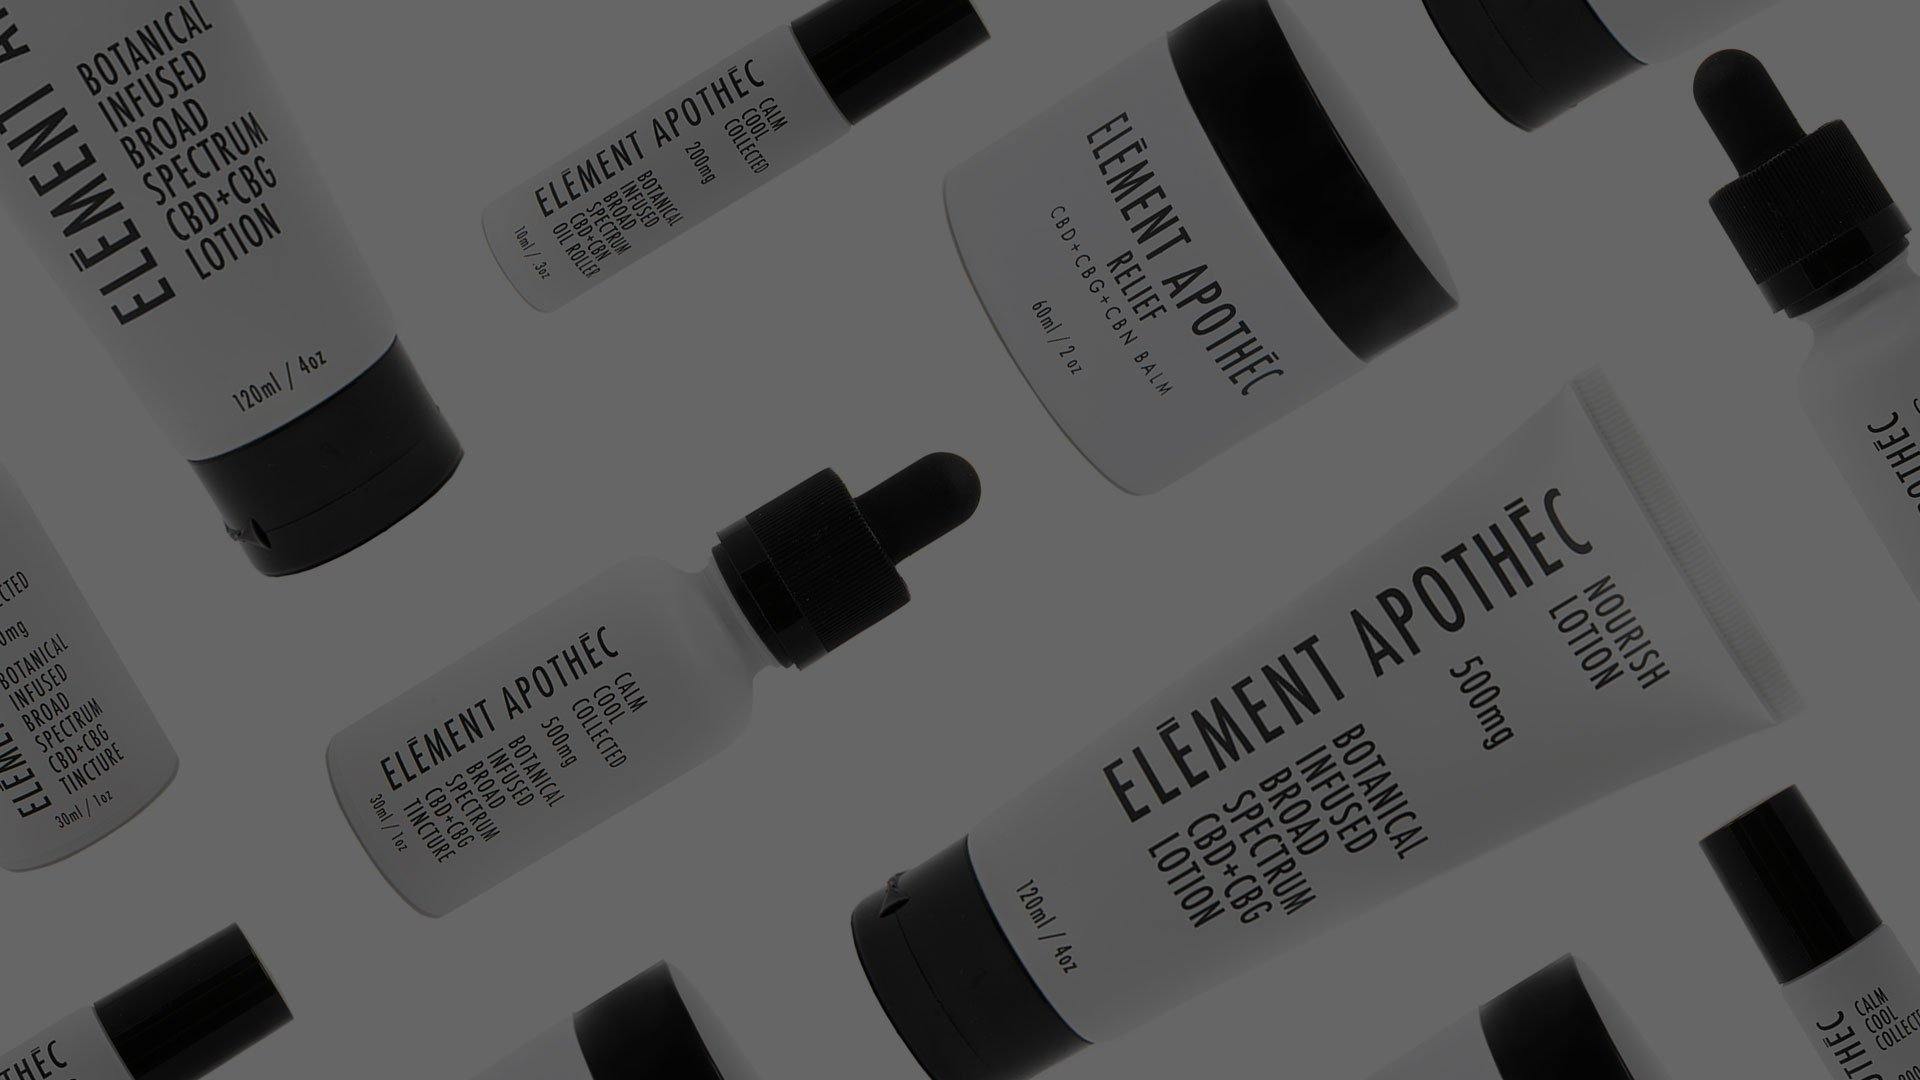 Element Apothec to Set New Quality Standard for CBD Wellness and Clean Beauty Products - Element Apothec